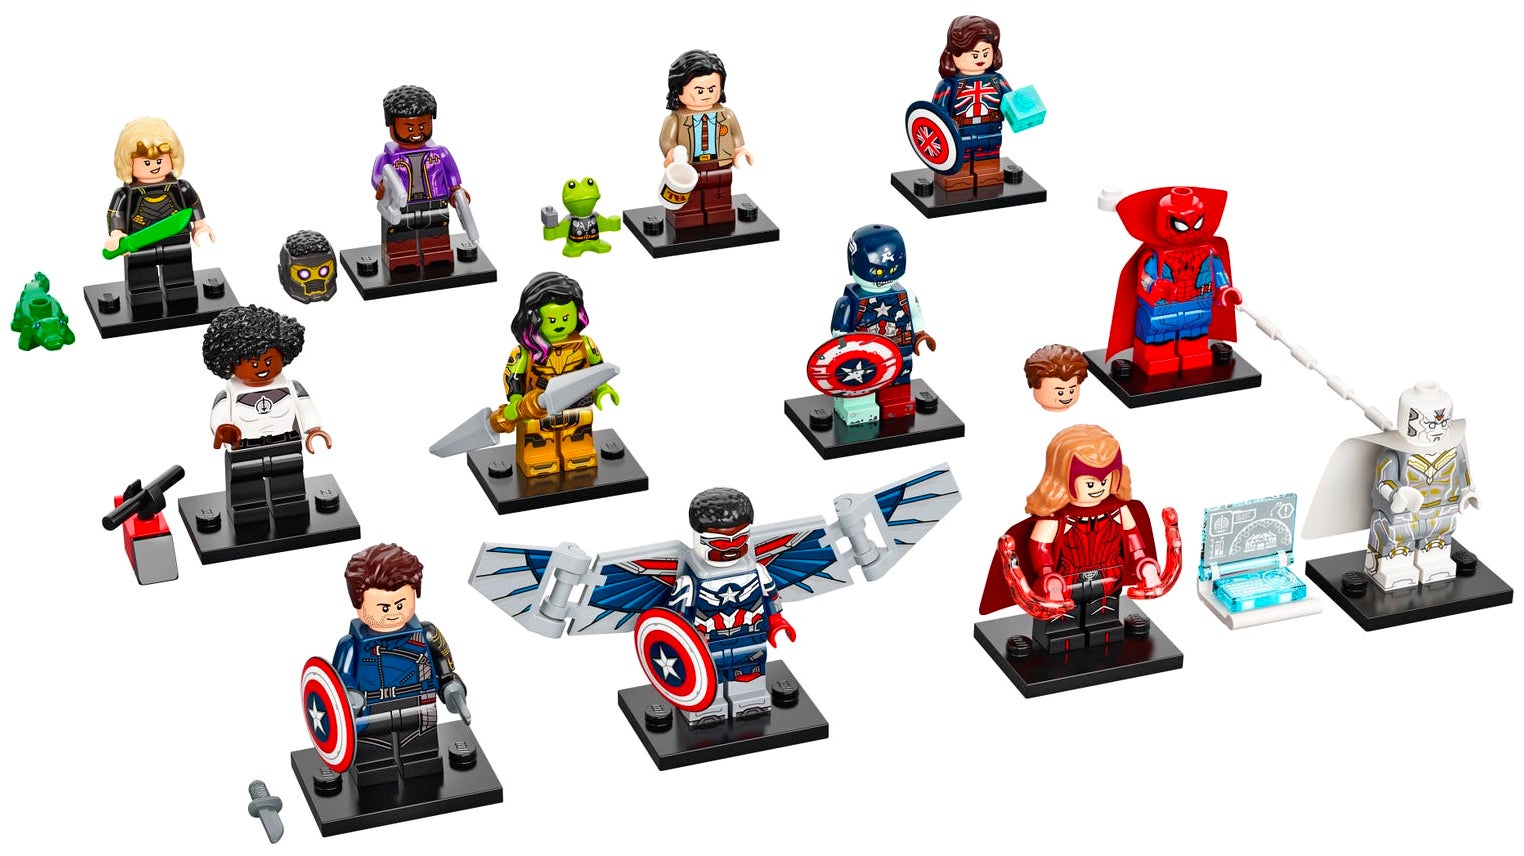 Lego’s New Marvel-Themed Minifigures Are a Highly Tempting Collectible